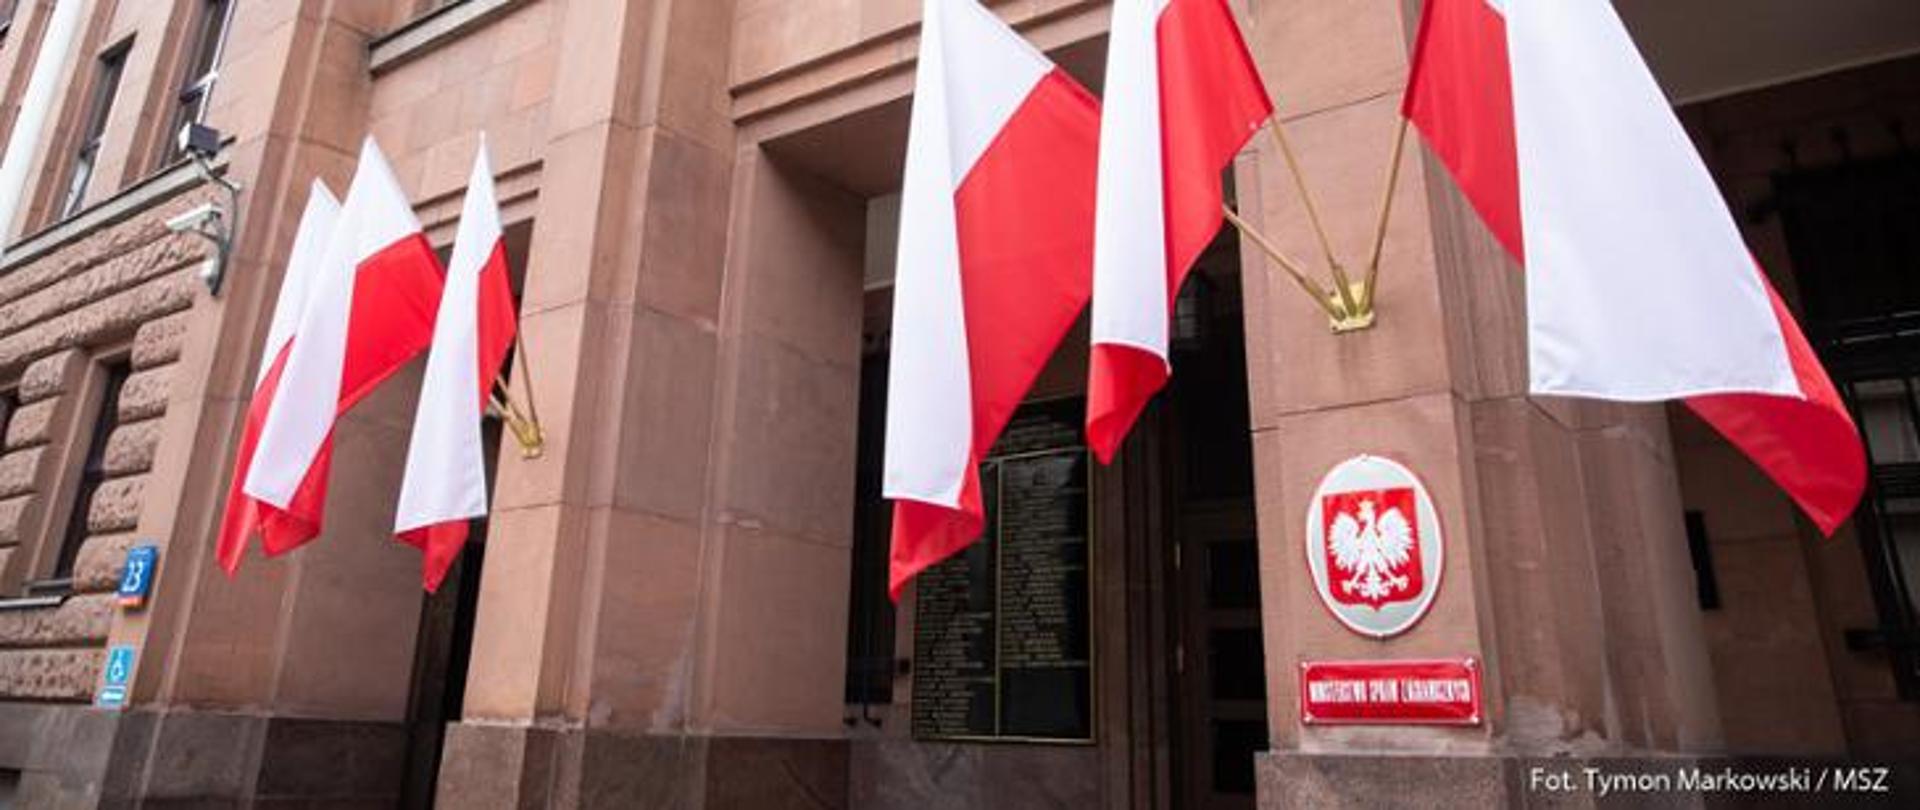 Ministry of Foreign Affairs, Warsaw, Poland